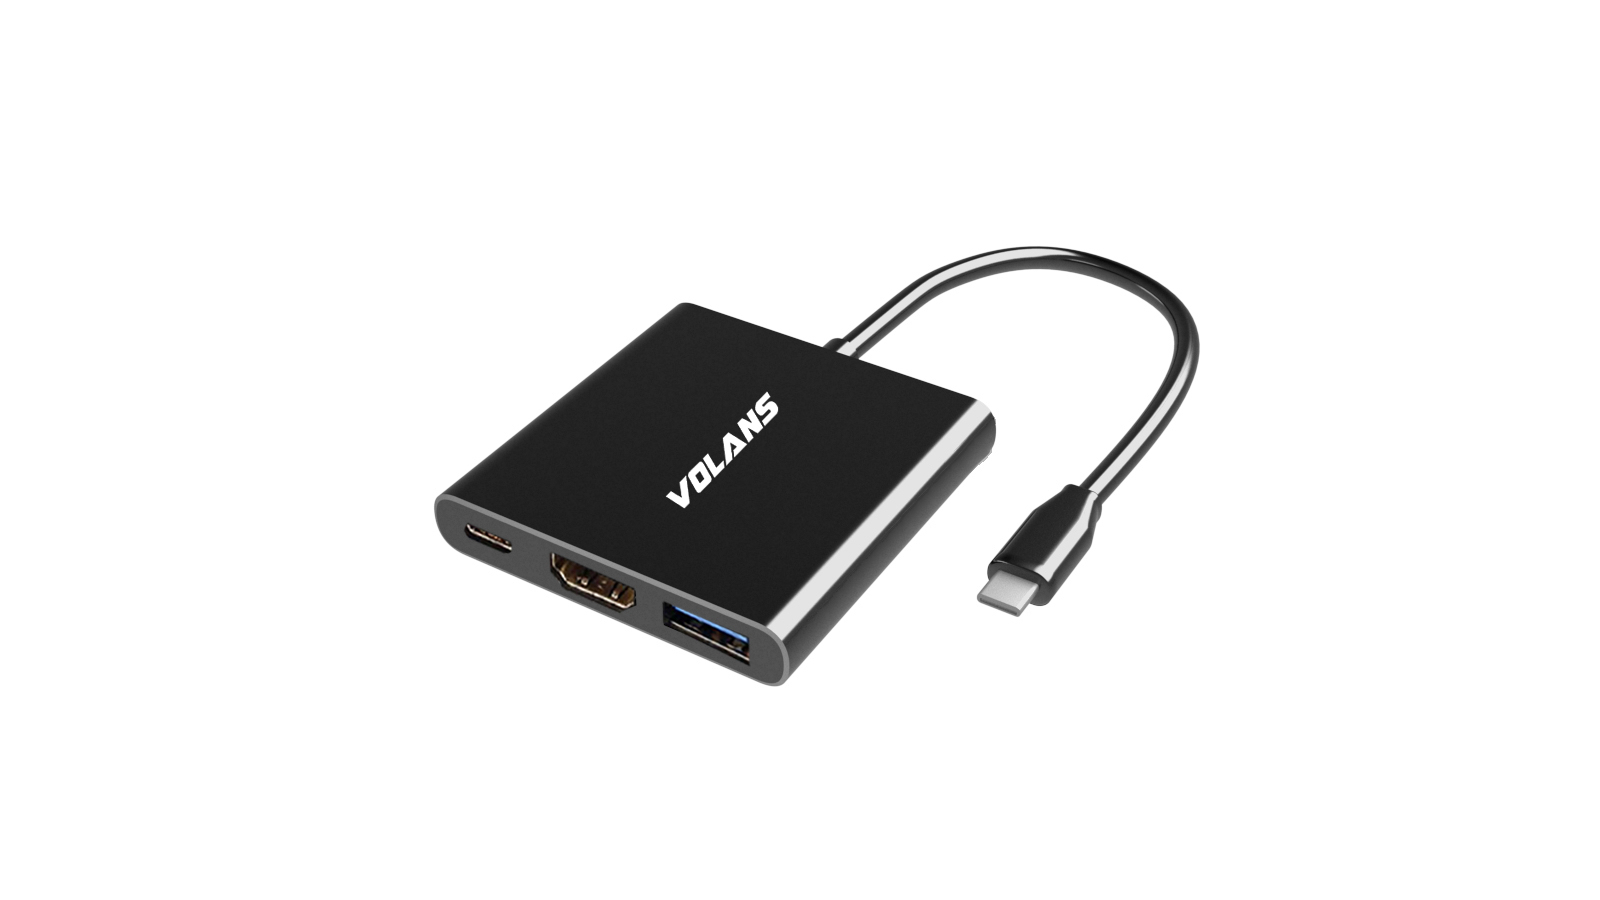  Aluminium (type-C) USB-C to HDMI 4K @60Hz/ USB 3.0/ USB Type-C - Multi-Port Adapter With Power Delivery  